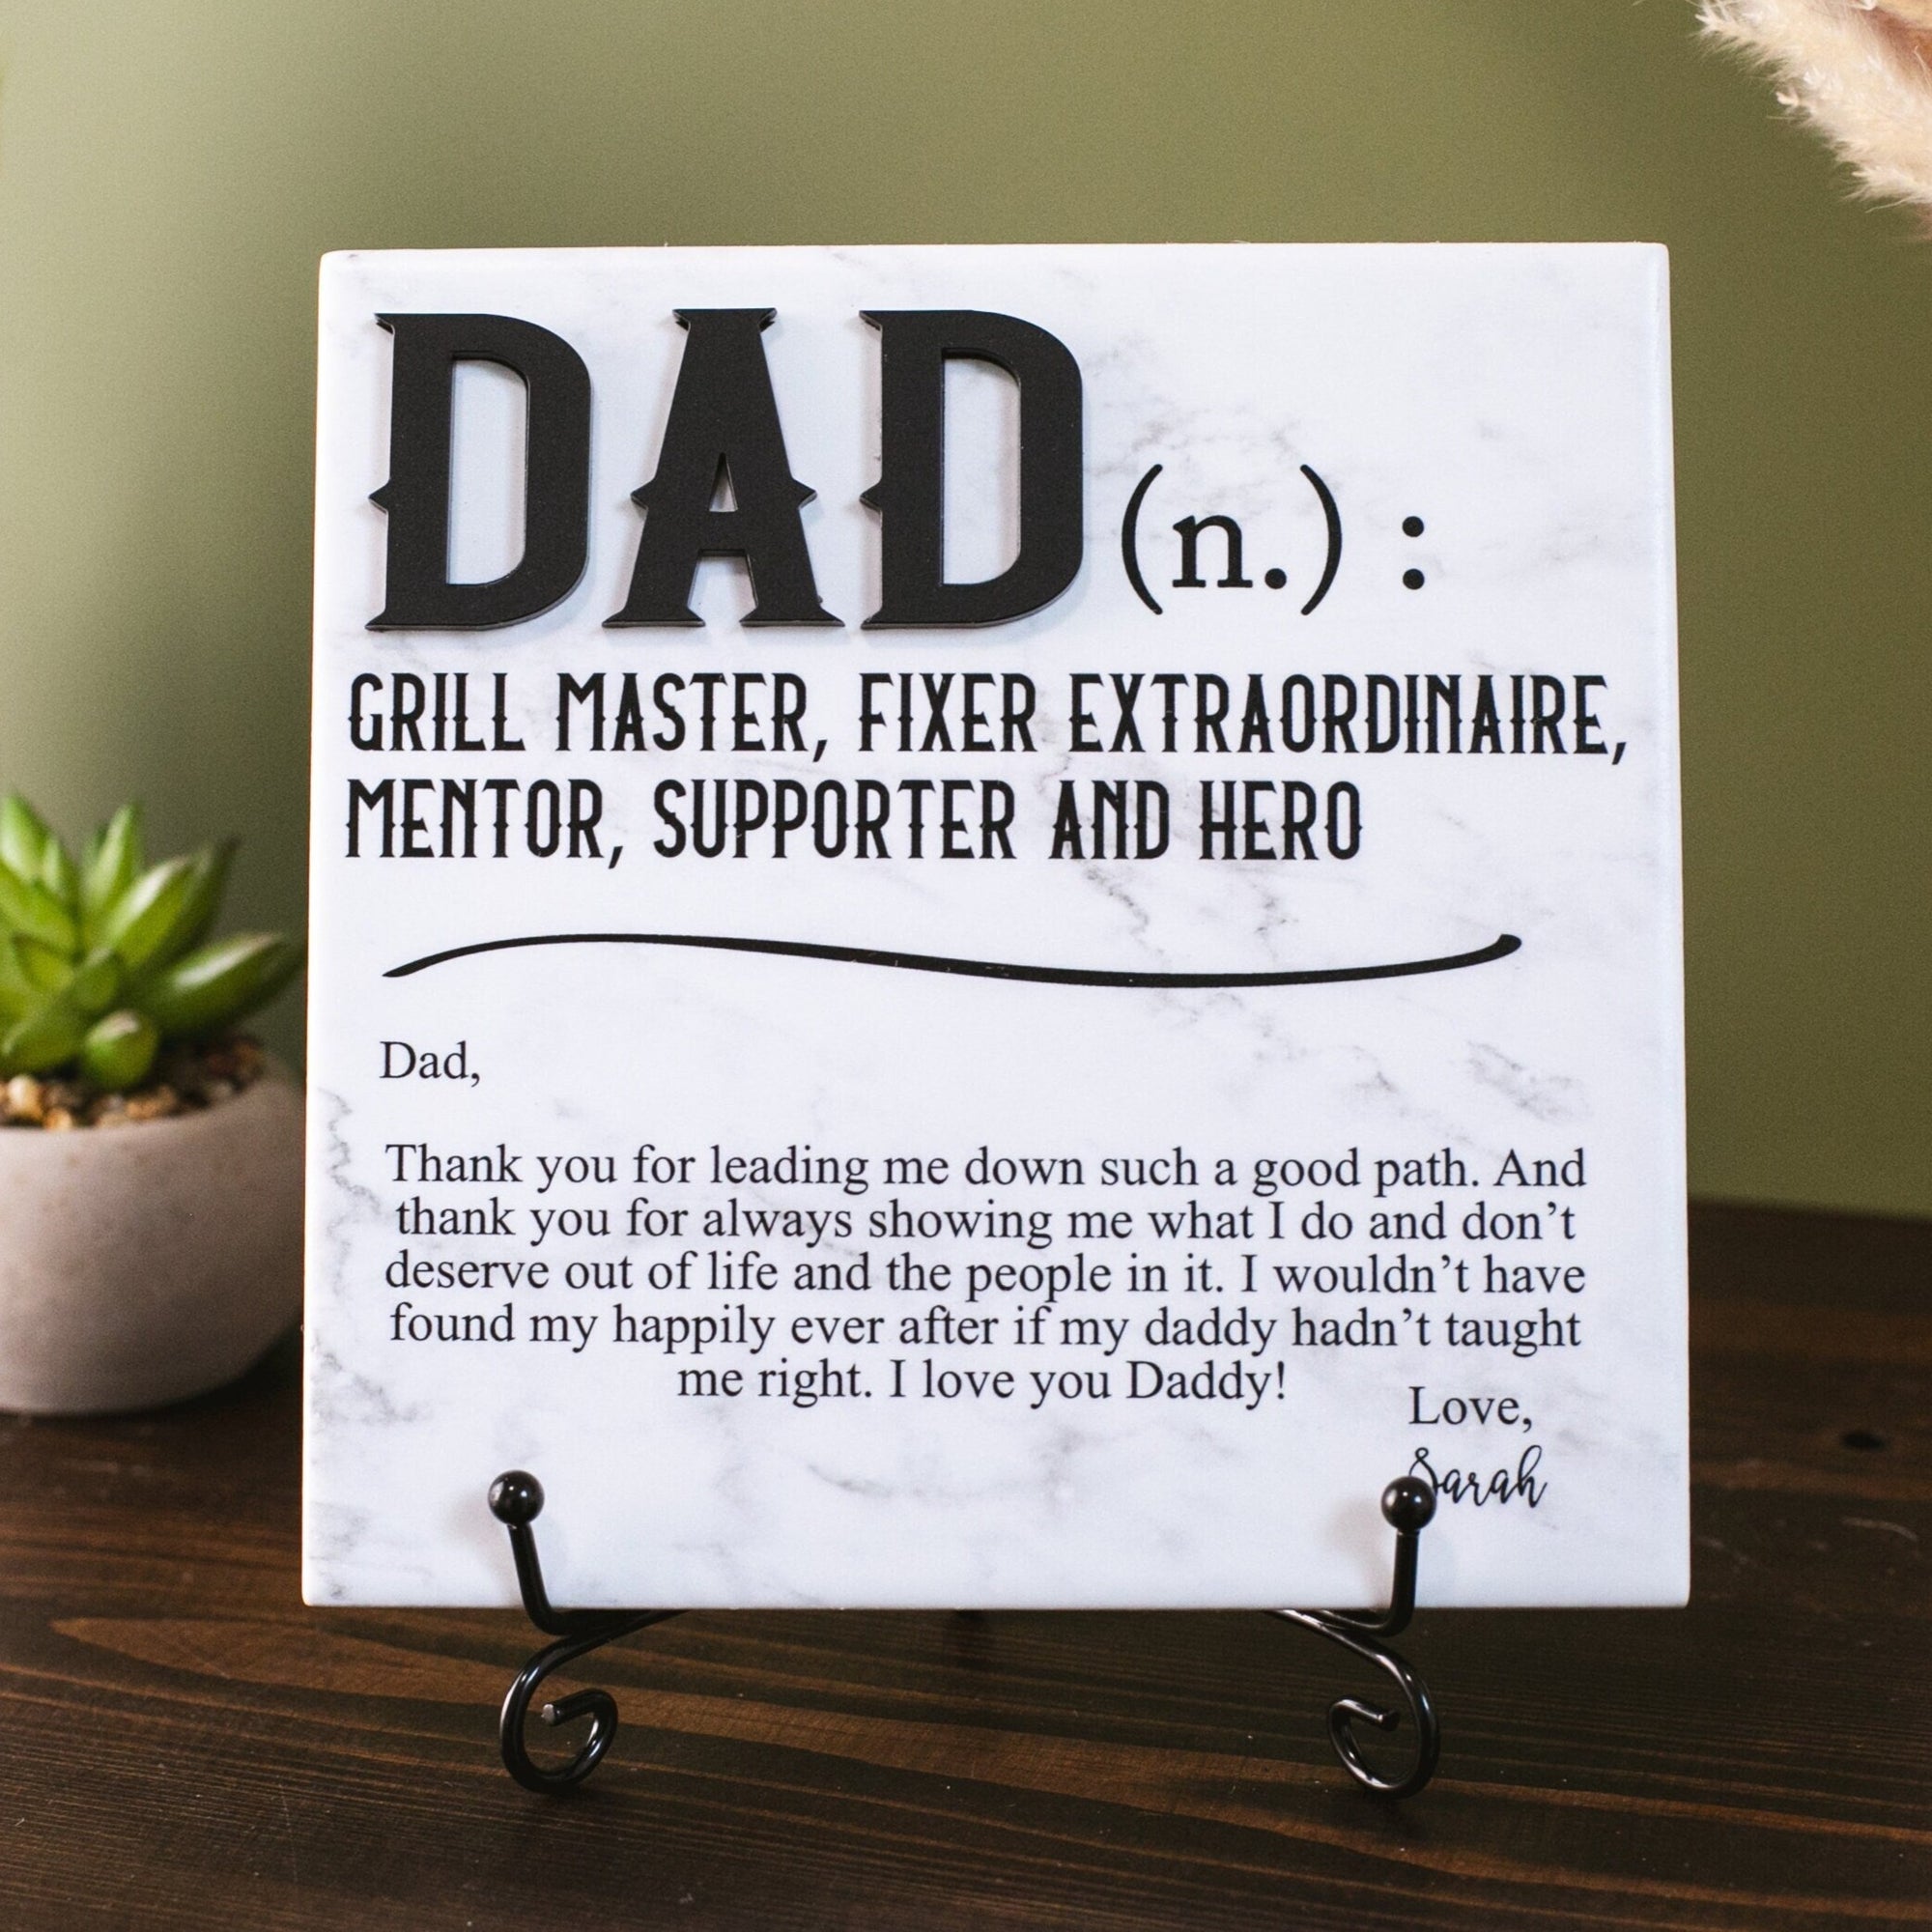 3D Grill Master Personalized Ceramic Tile Sign Gift, Fathers Day Present Idea, Wall Decor, Stepdad, Papa, Dad + Grandpa Also Available